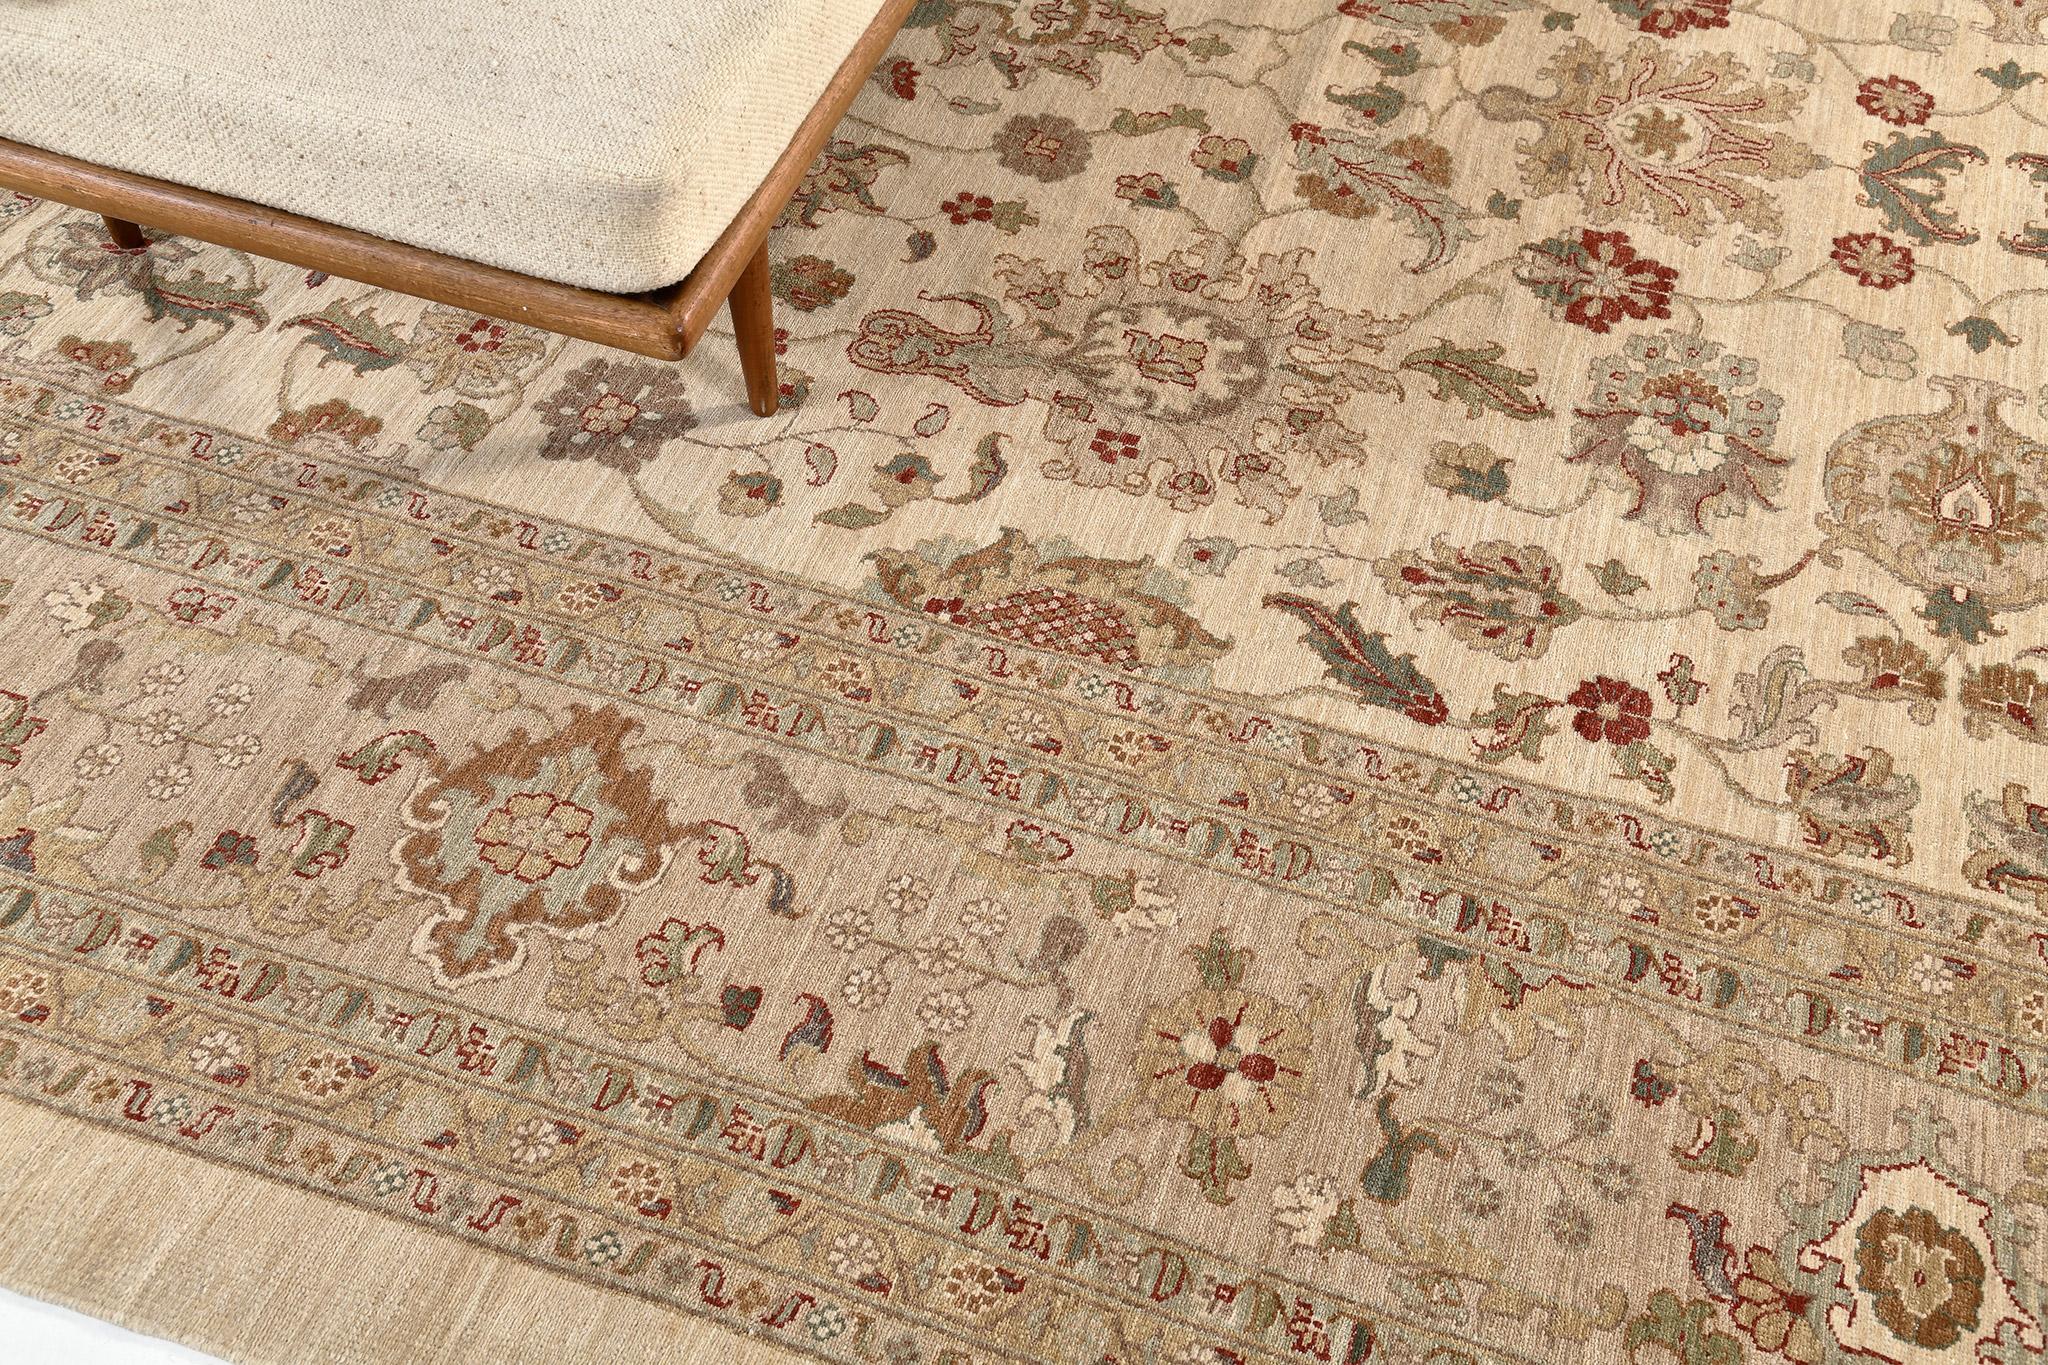 A magnificent Sultanabad revival rug made from hand spun wool and natural dye that will give your space a sense of elegance and charm. Embodying the stunning details of palmettes and tendrils strewn gracefully across an exquisite taupe field that is